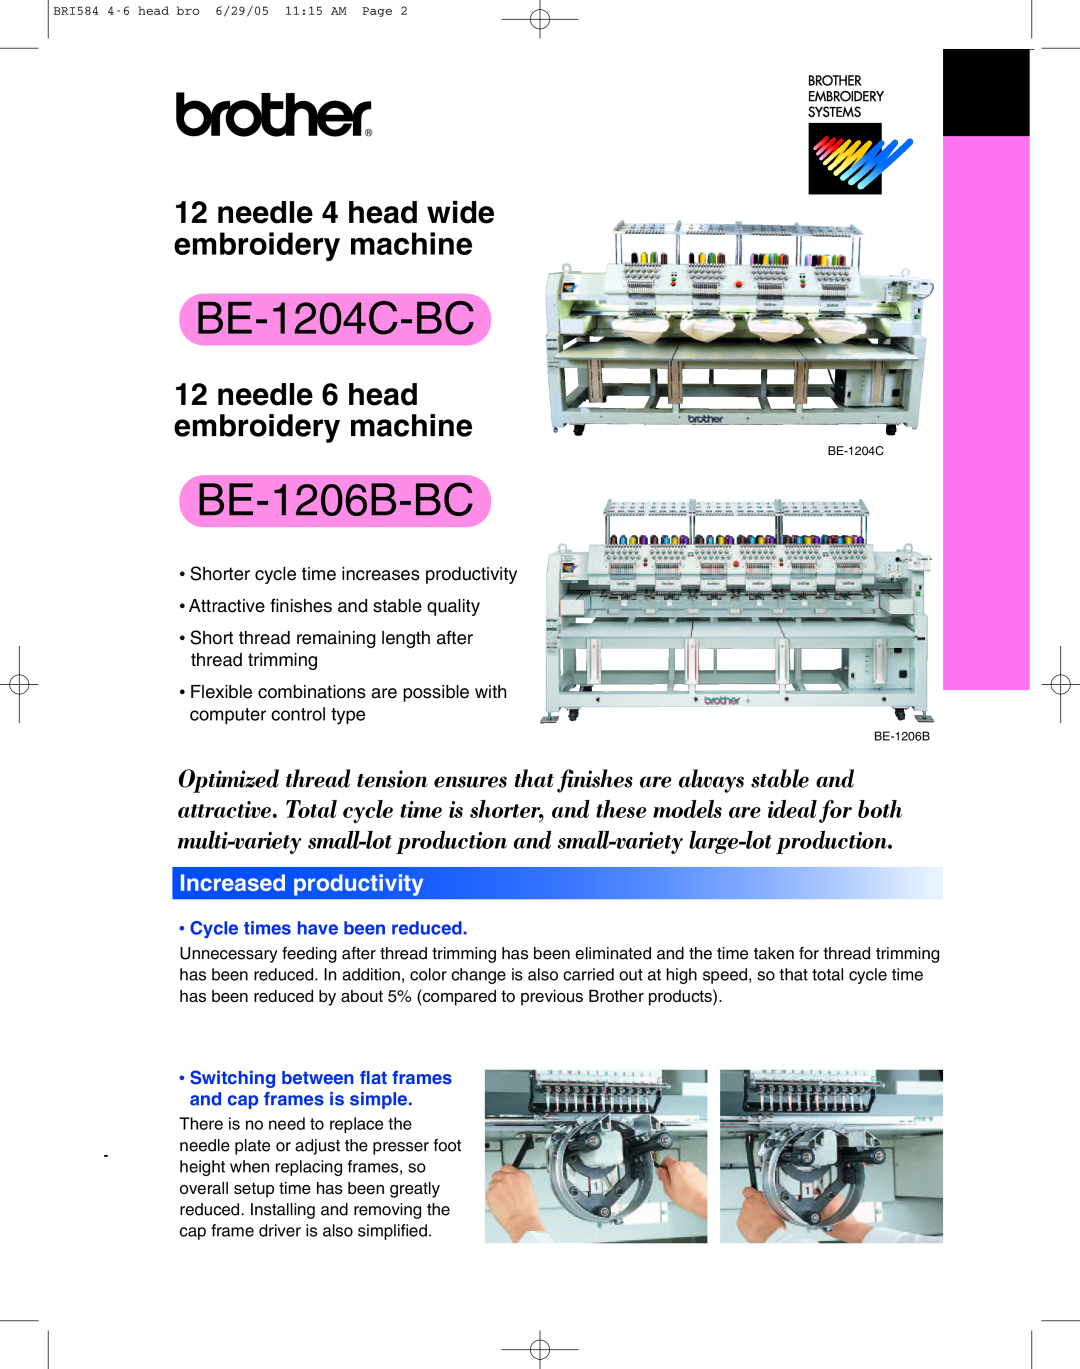 Brother BE-1206B-BC specifications Increased productivity, BE-1204C-BC, needle 4 head wide embroidery machine 